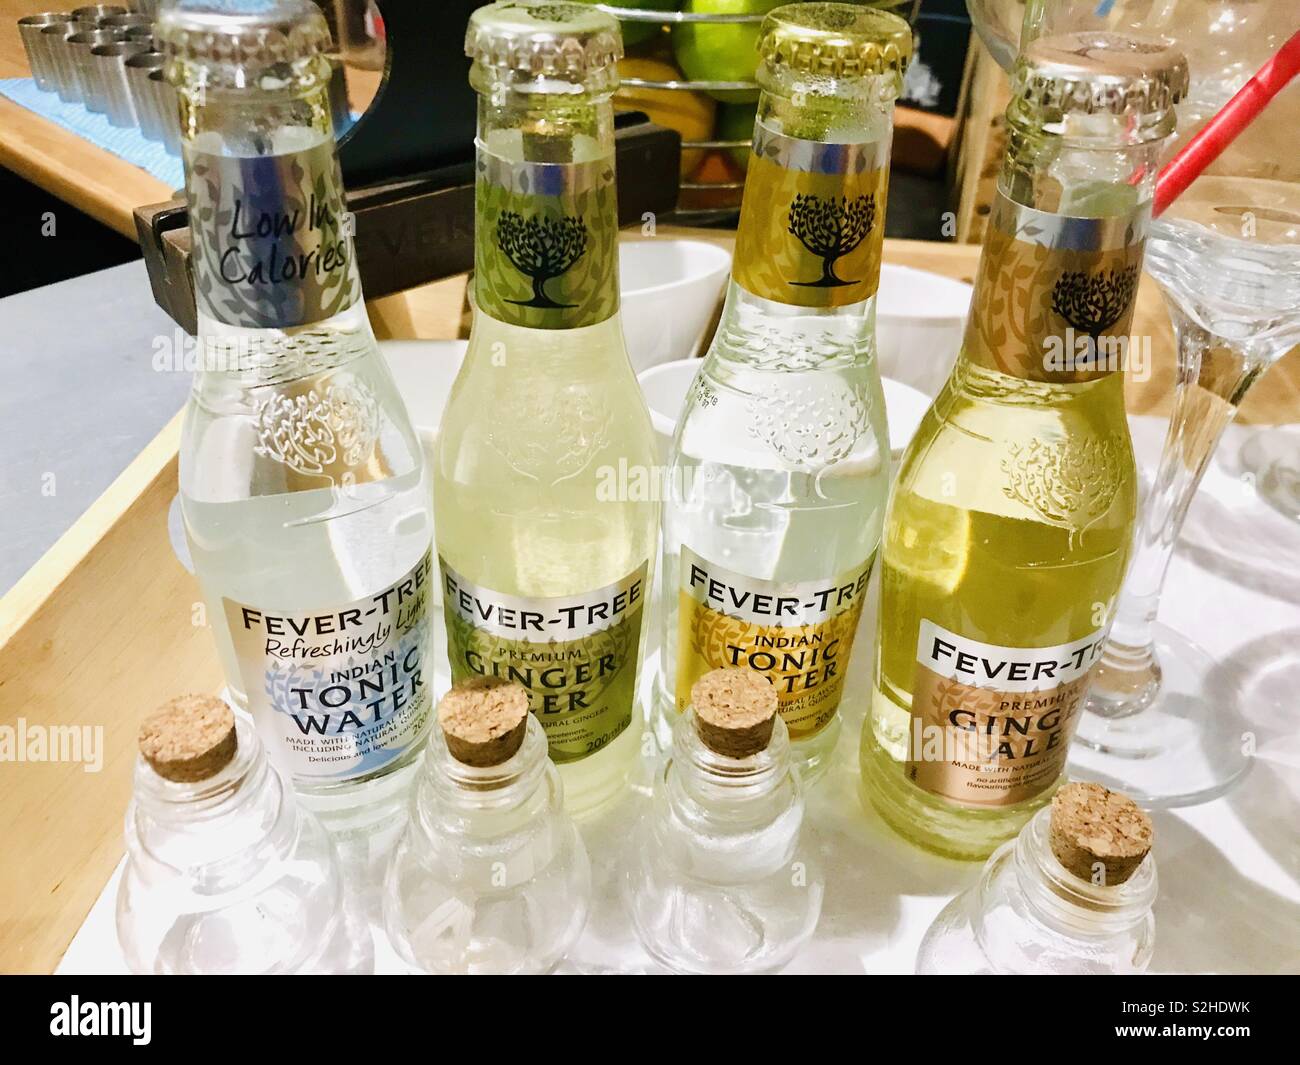 Fever tree drink selection Stock Photo